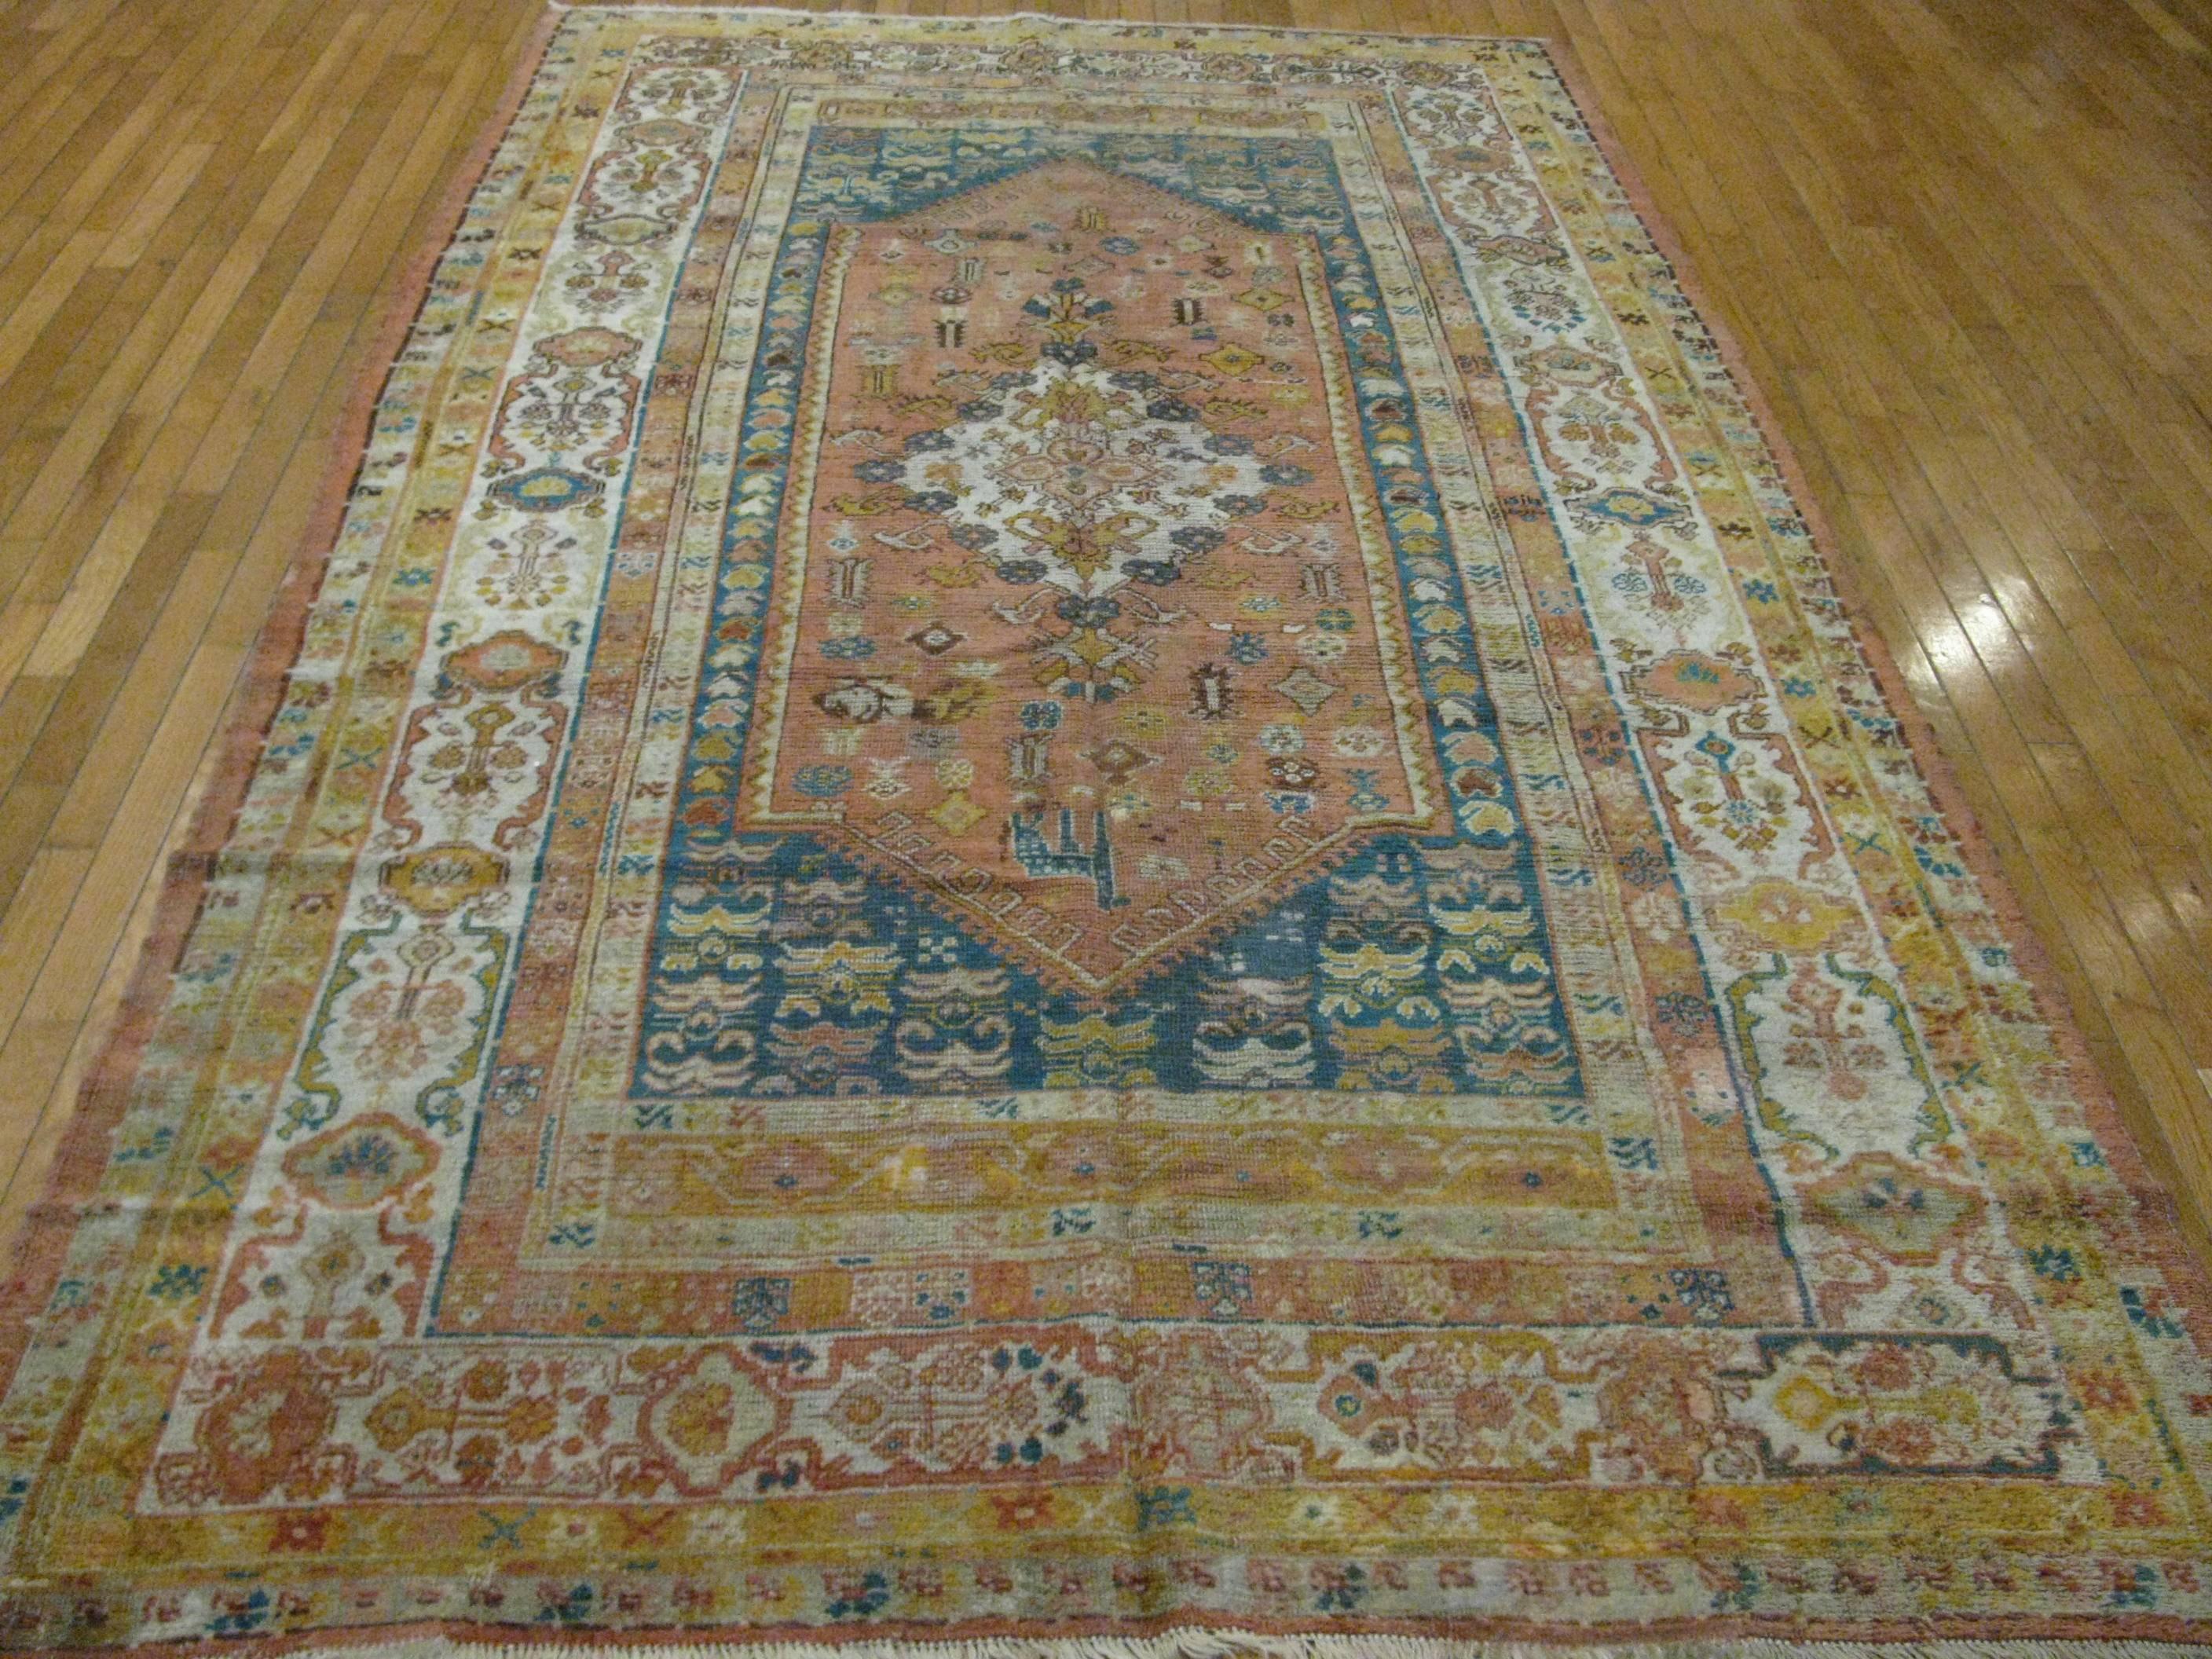 This is an antique hand-knotted Turkish Oushak rug with a finely hand-knotted construction with angora wool and natural dyes in a detailed traditional pattern, circa 1900.